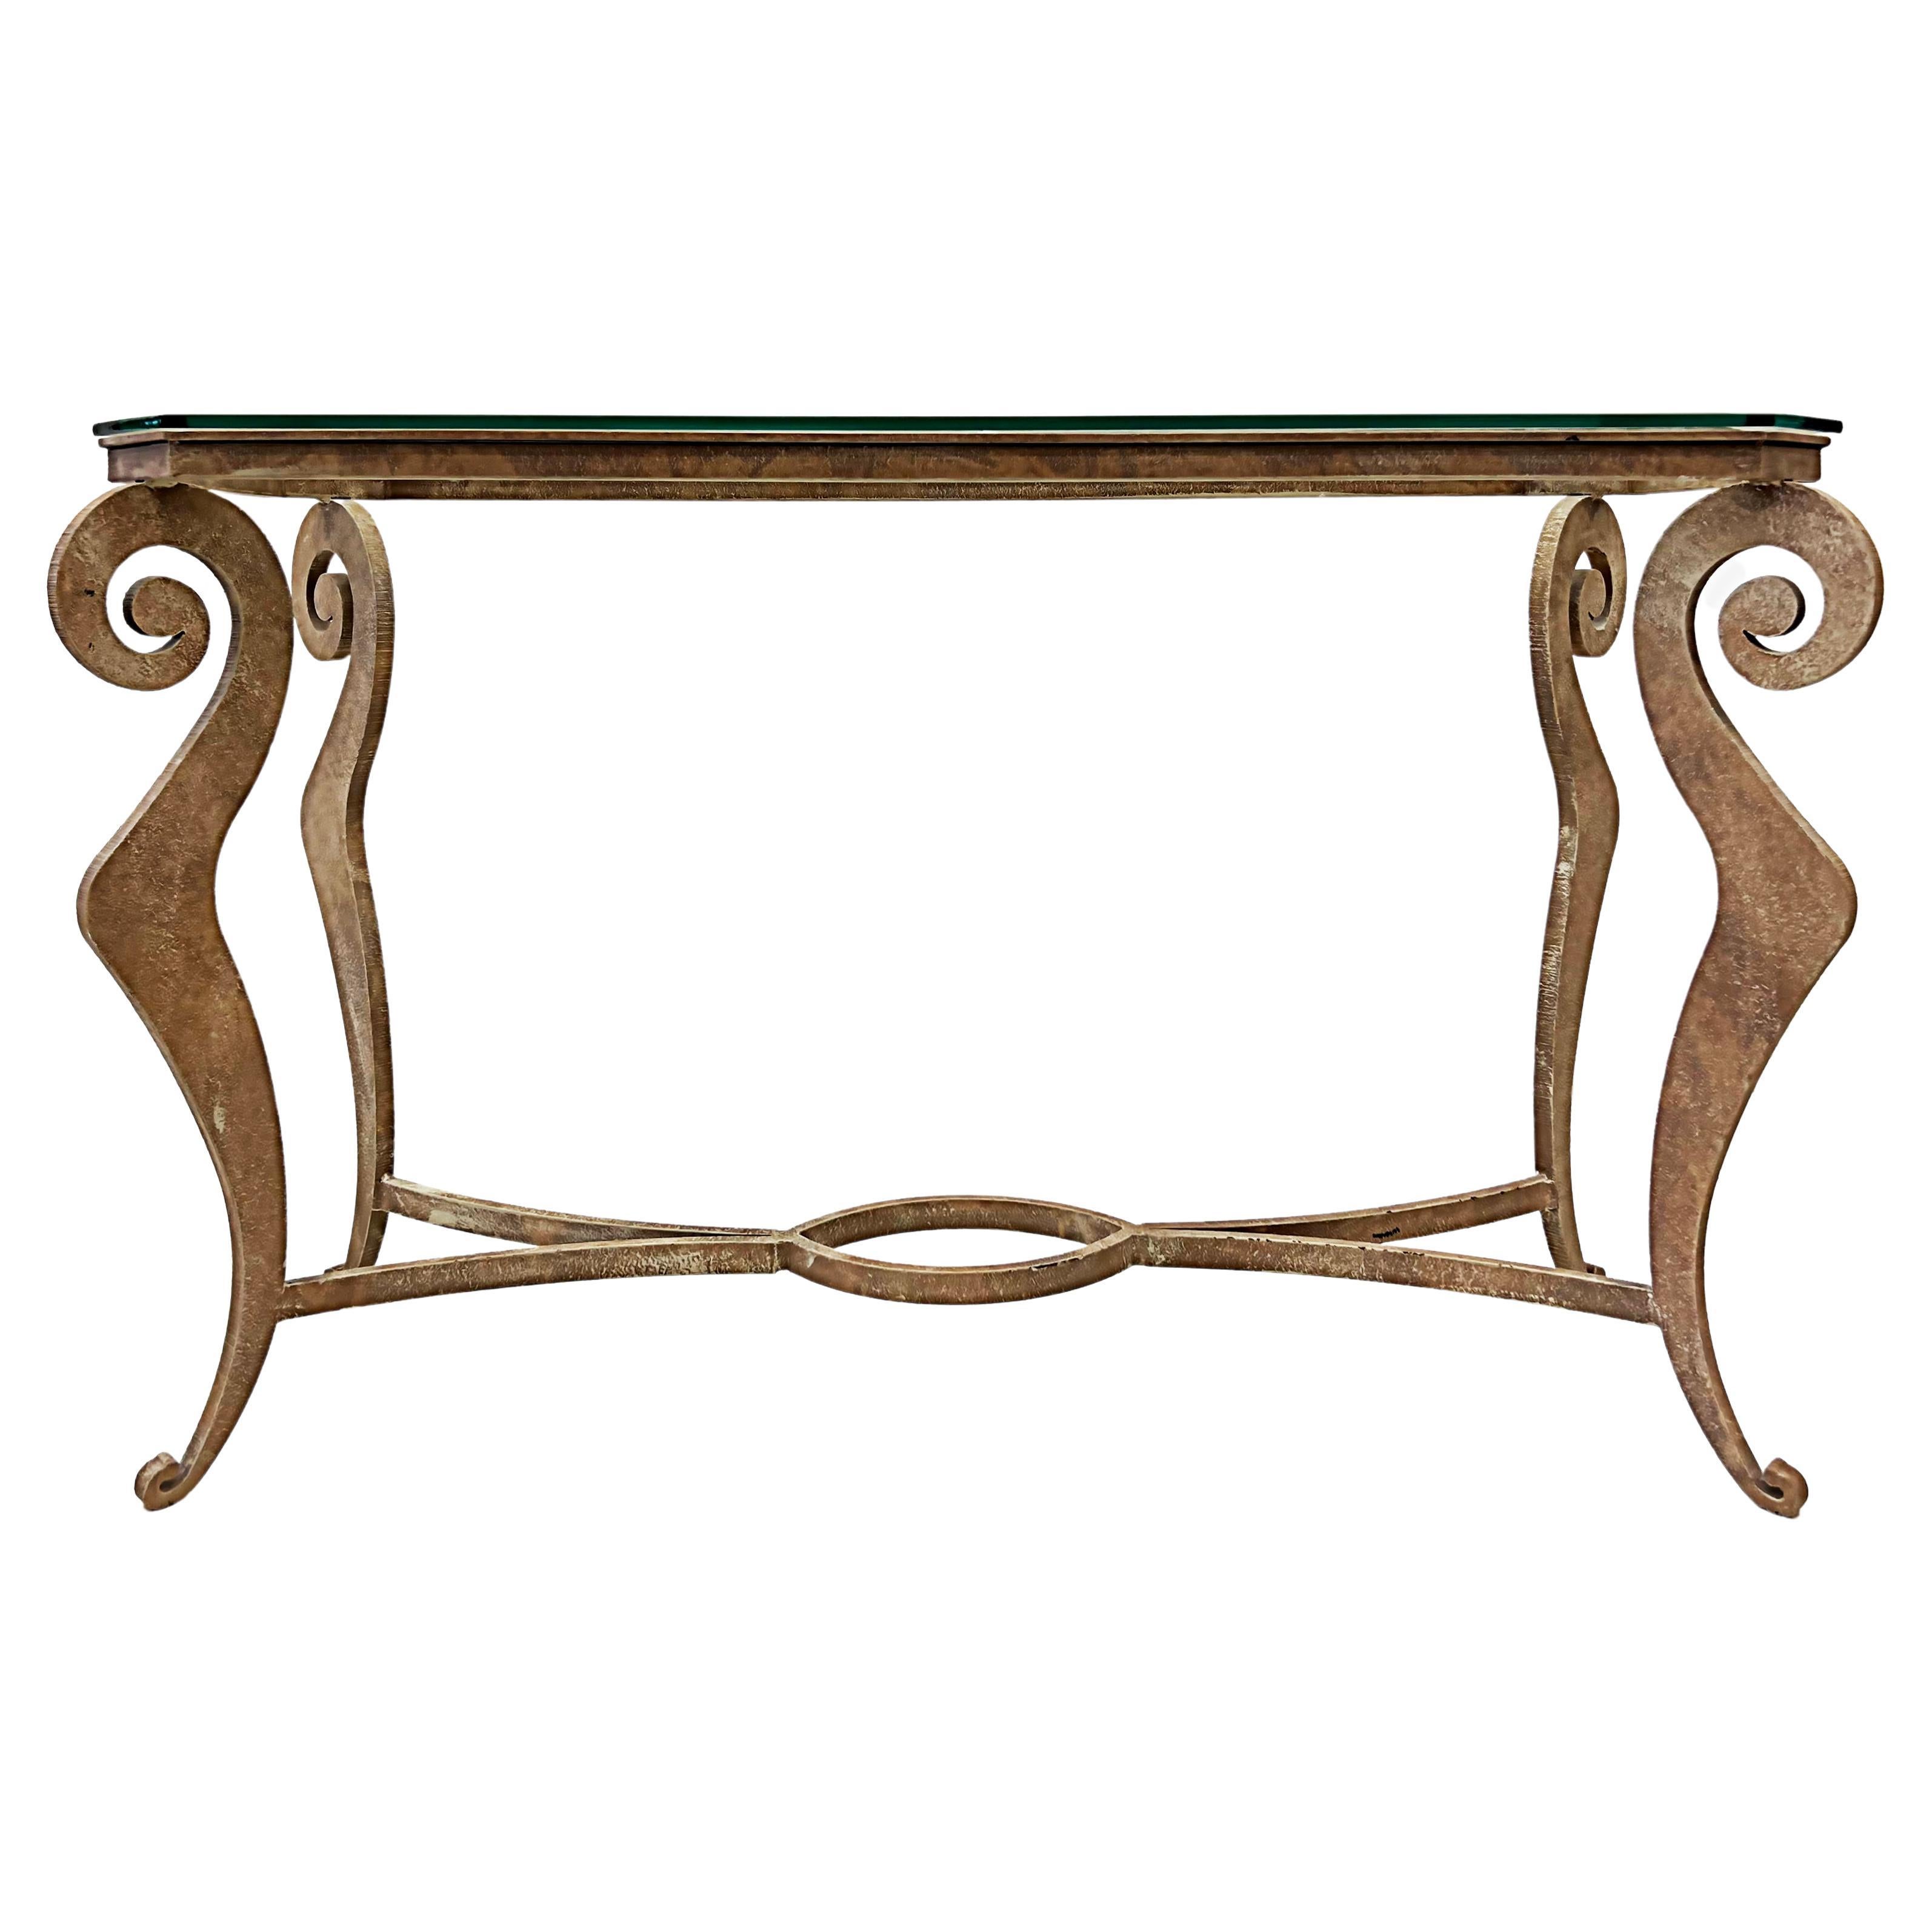 1990s Donghia Style Steel Cut Stylized Console Table with Glass Top For Sale